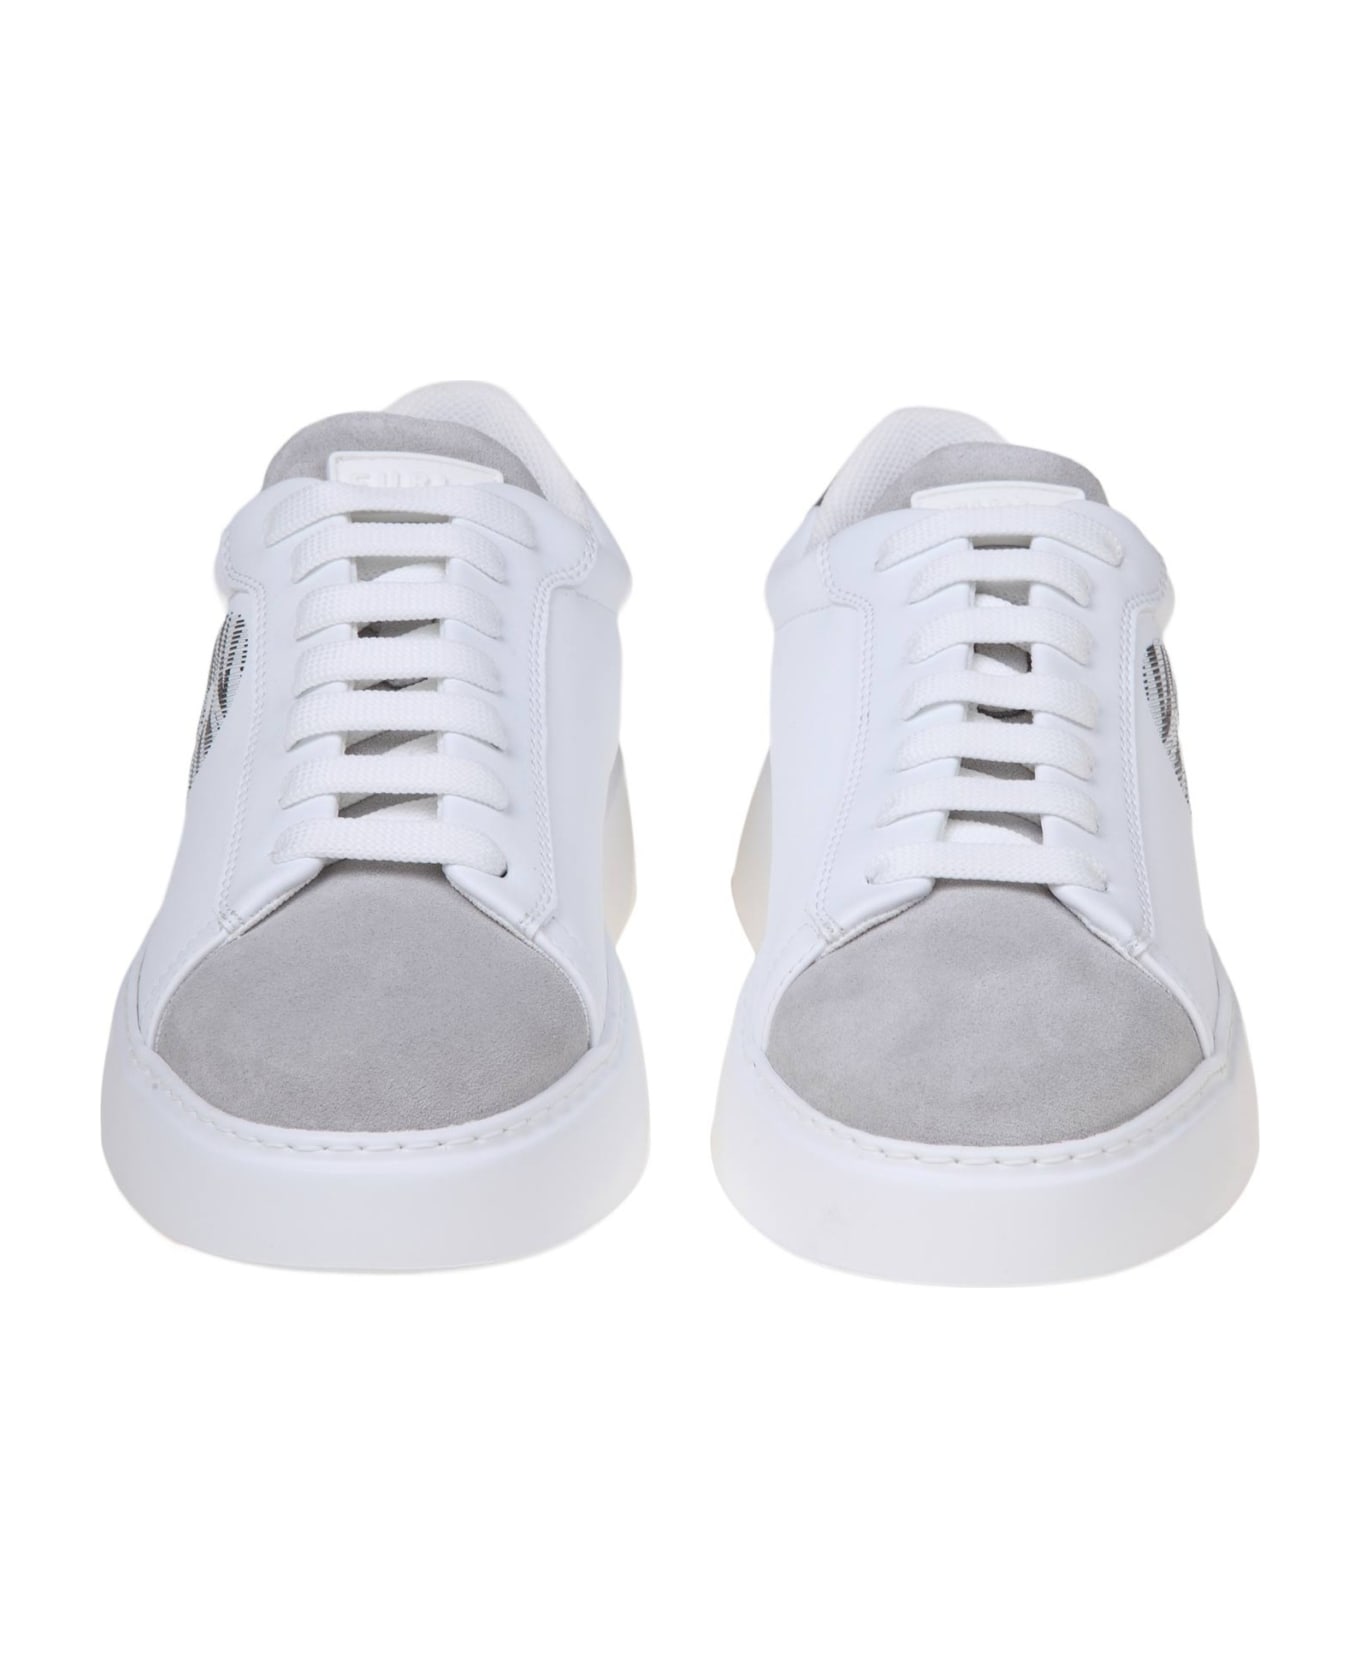 Furla Sports Sneakers In White Leather - White